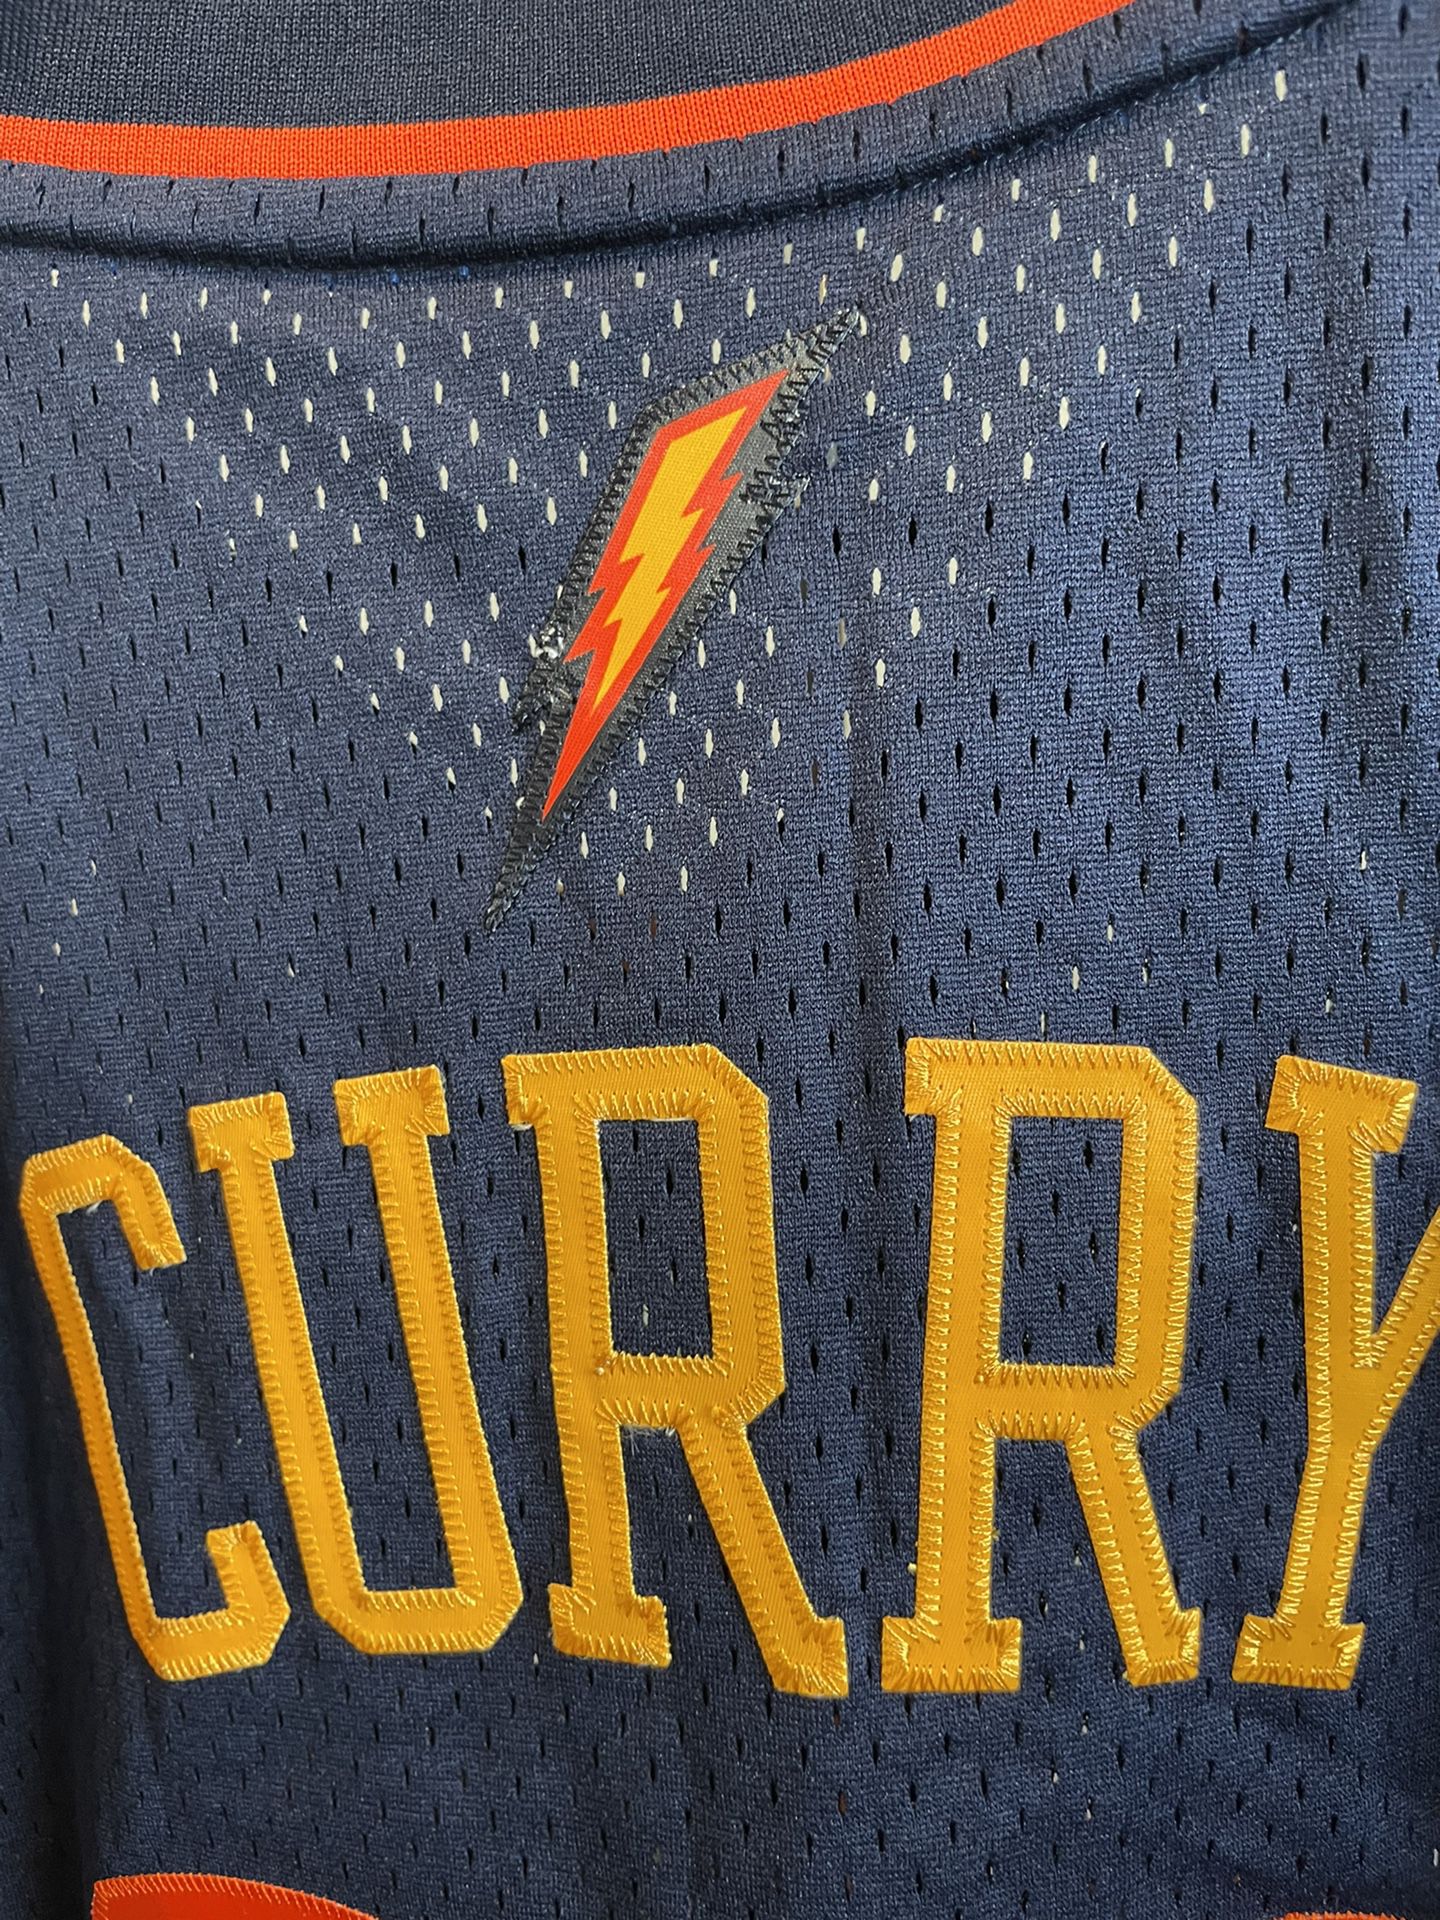 Adidas Warriors Steph Curry Chinese New Years Jersey Year Of Monkey Men's  Small for Sale in Queens, NY - OfferUp